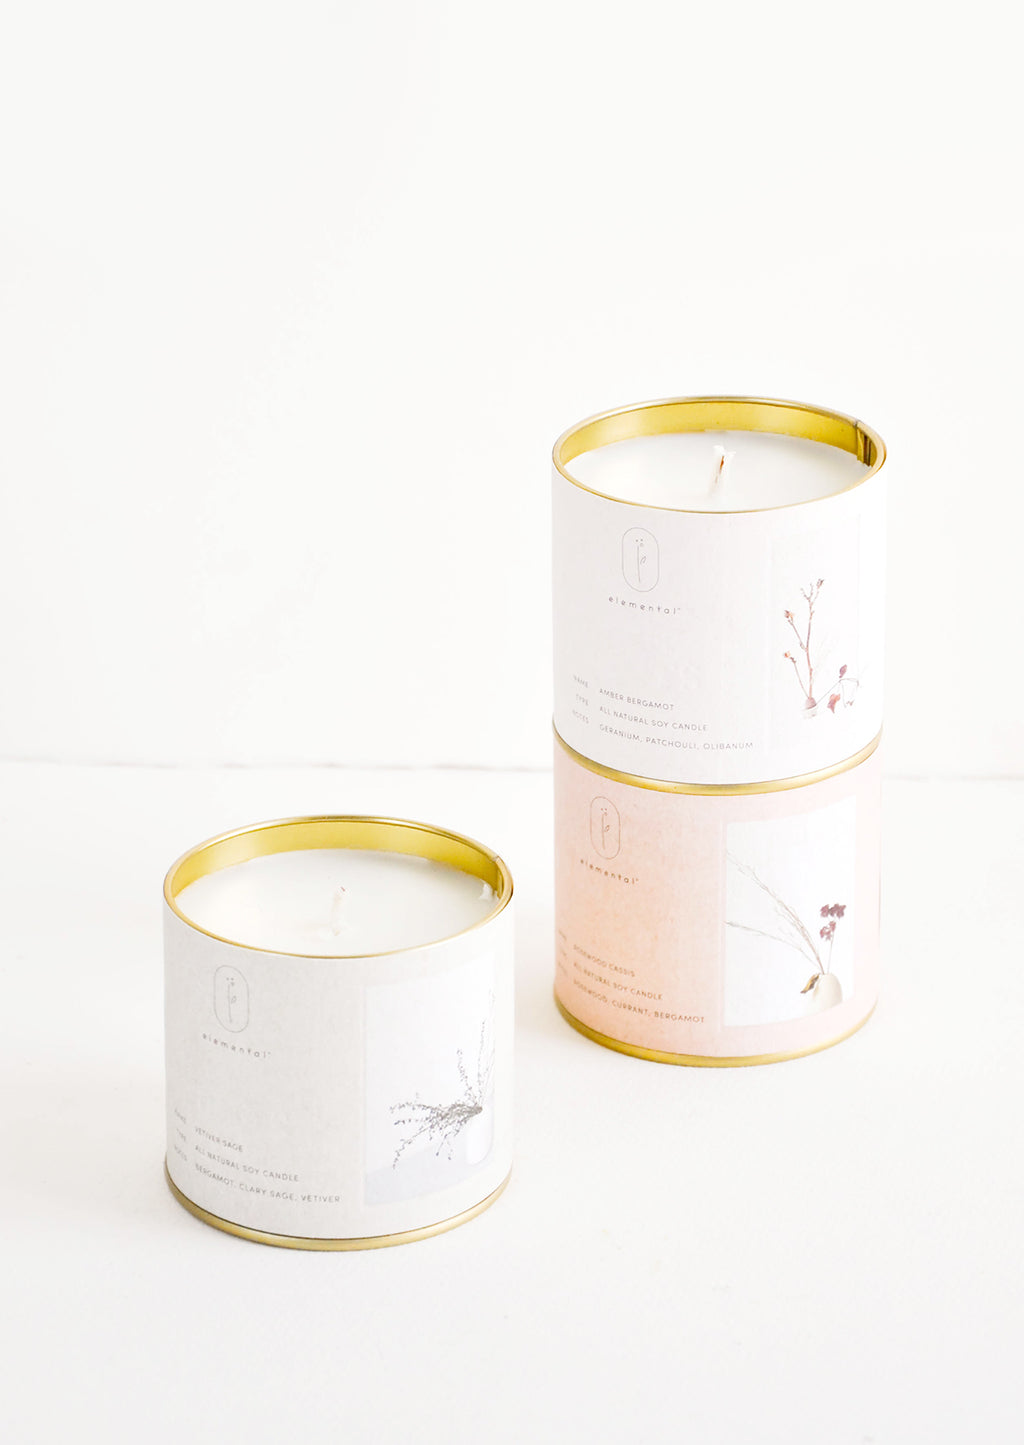 1: Three candles in brass tins with paper labels of gray, beige, and pale pink.